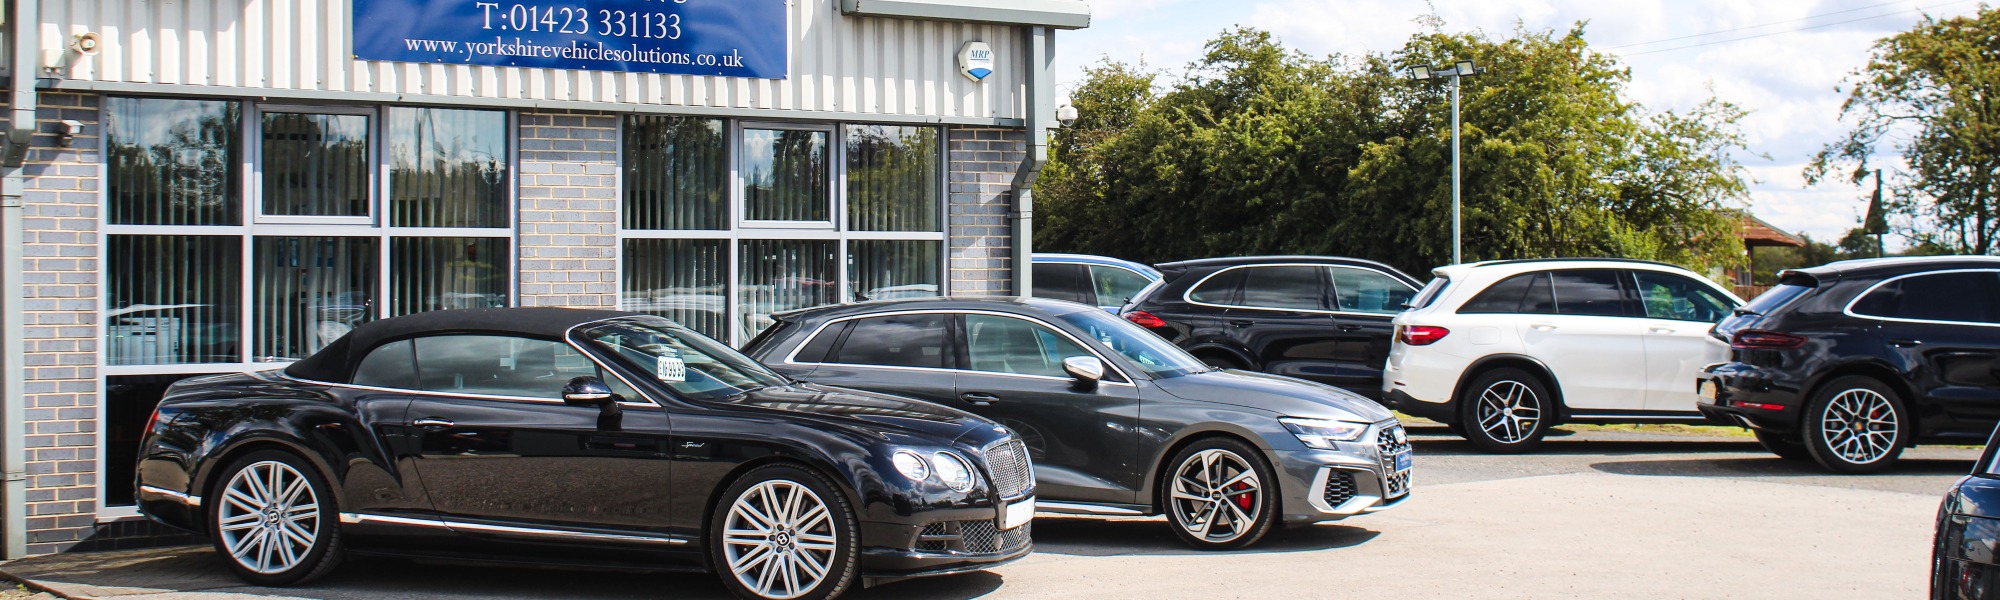 Sell your Car at Yorkshire Vehicle Solutions